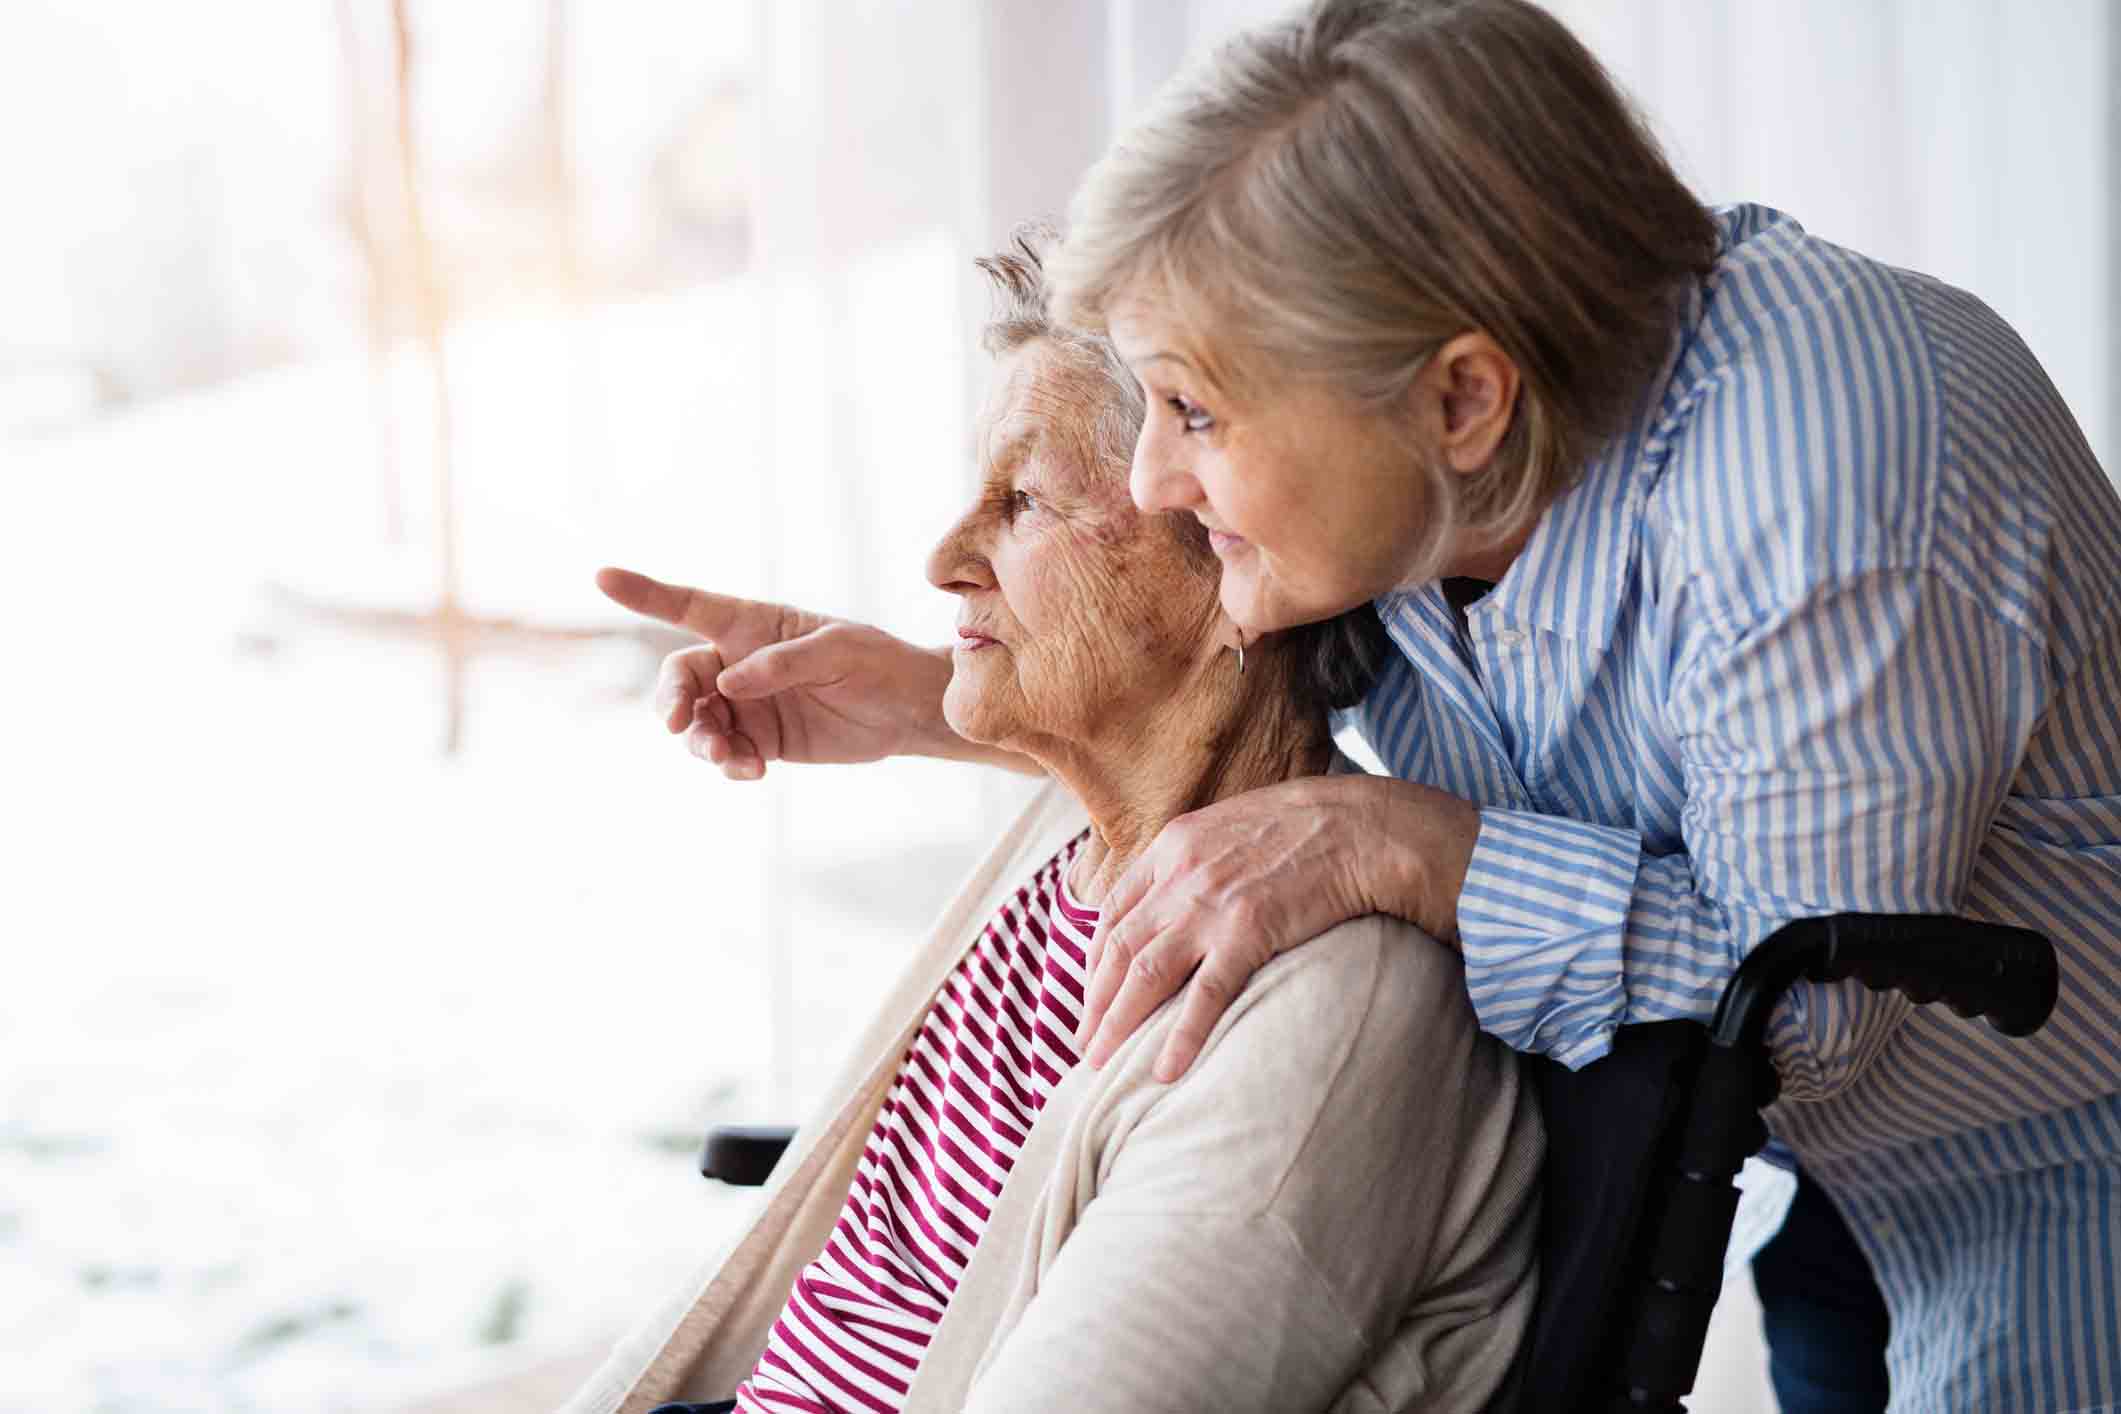 What Kind of Support is Available for Caregivers